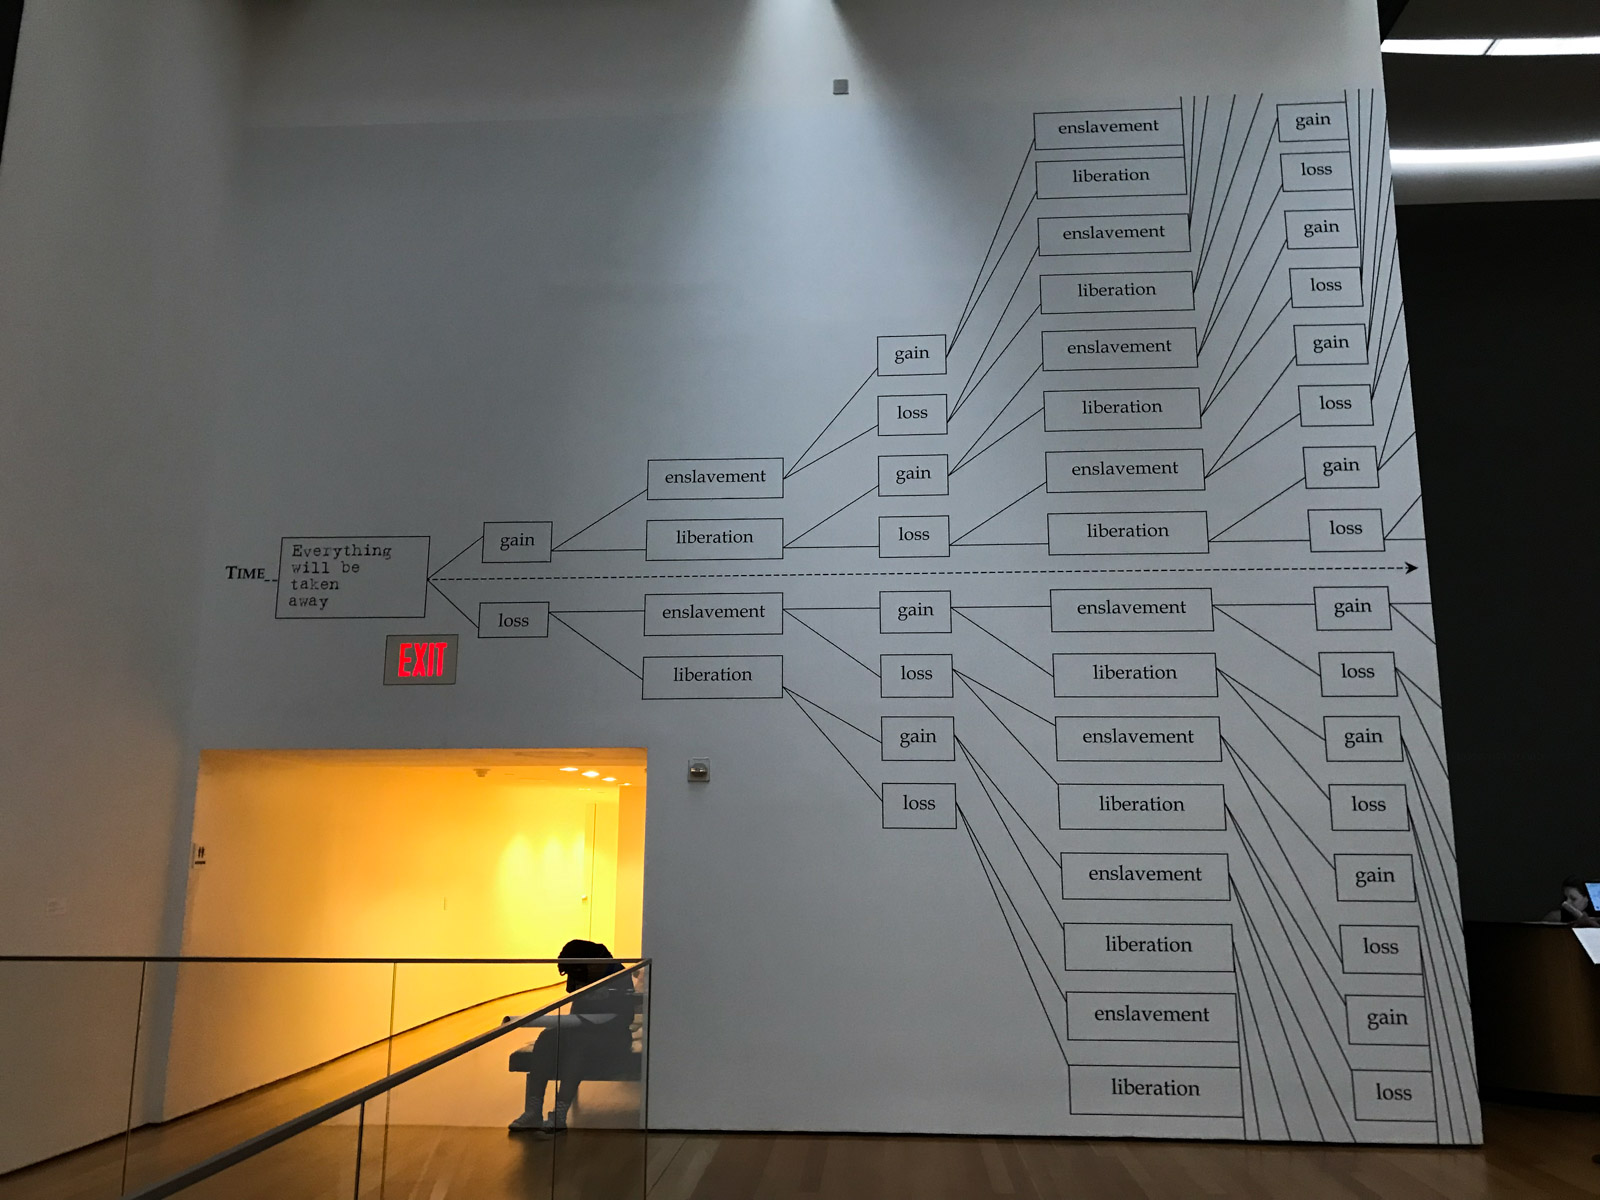 A large white wall inside an art gallery showing a digitally-printed tree. On the left is one node reading “TIME”, eventually branching out into many other nodes reading “enslavement”, “liberation”, “gain” and “loss”